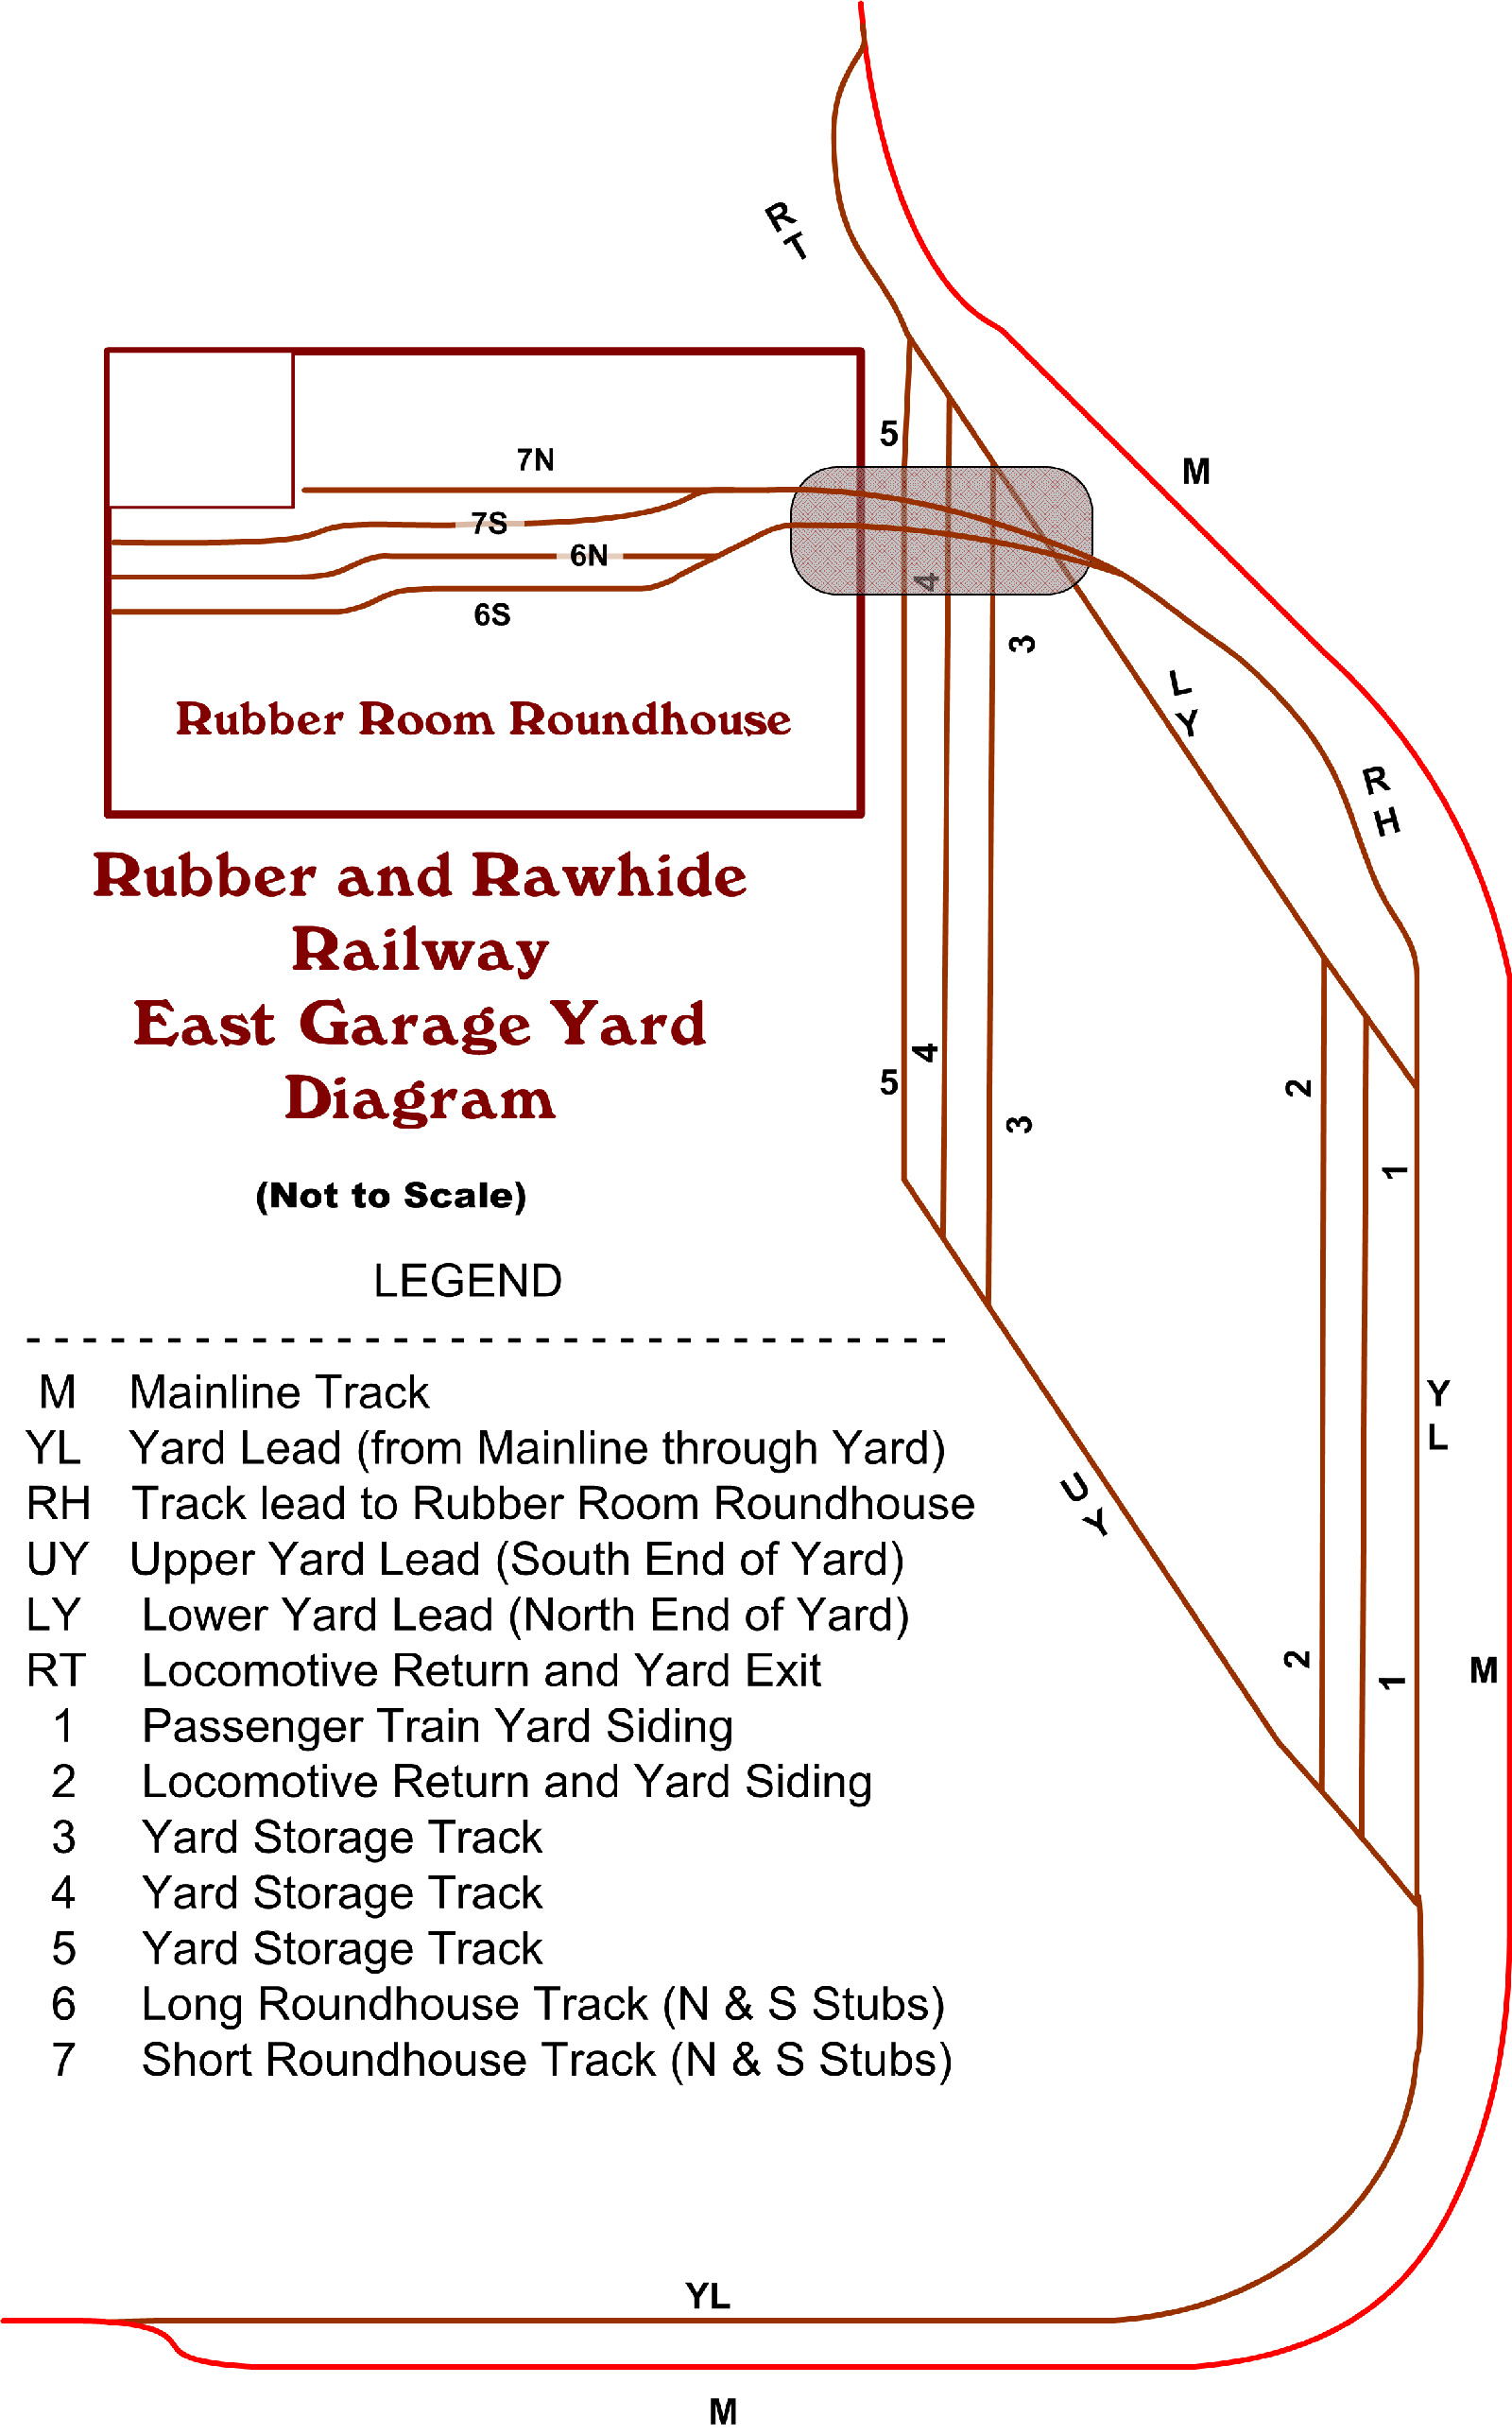 Rubber and Rawhide Railroad East Garage Yard Layout